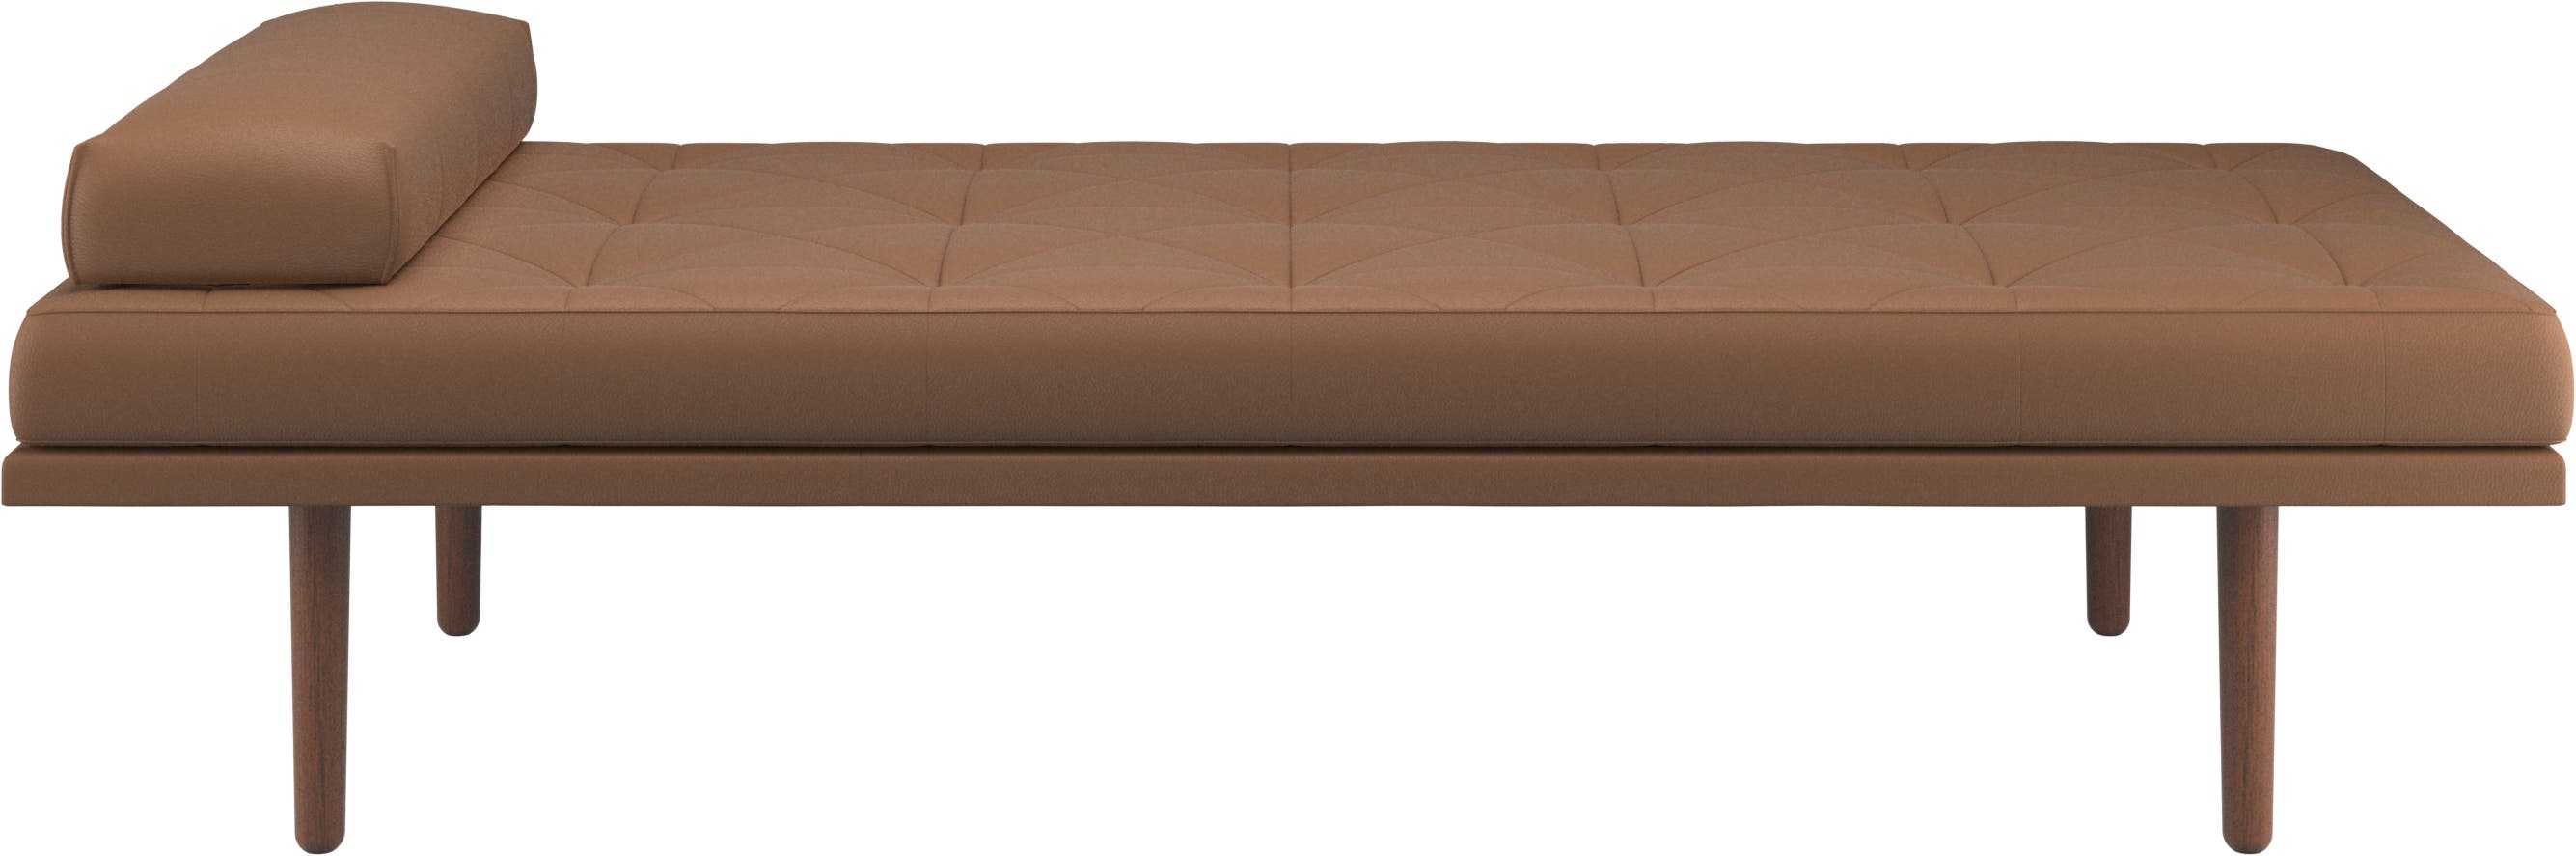 fusion daybed